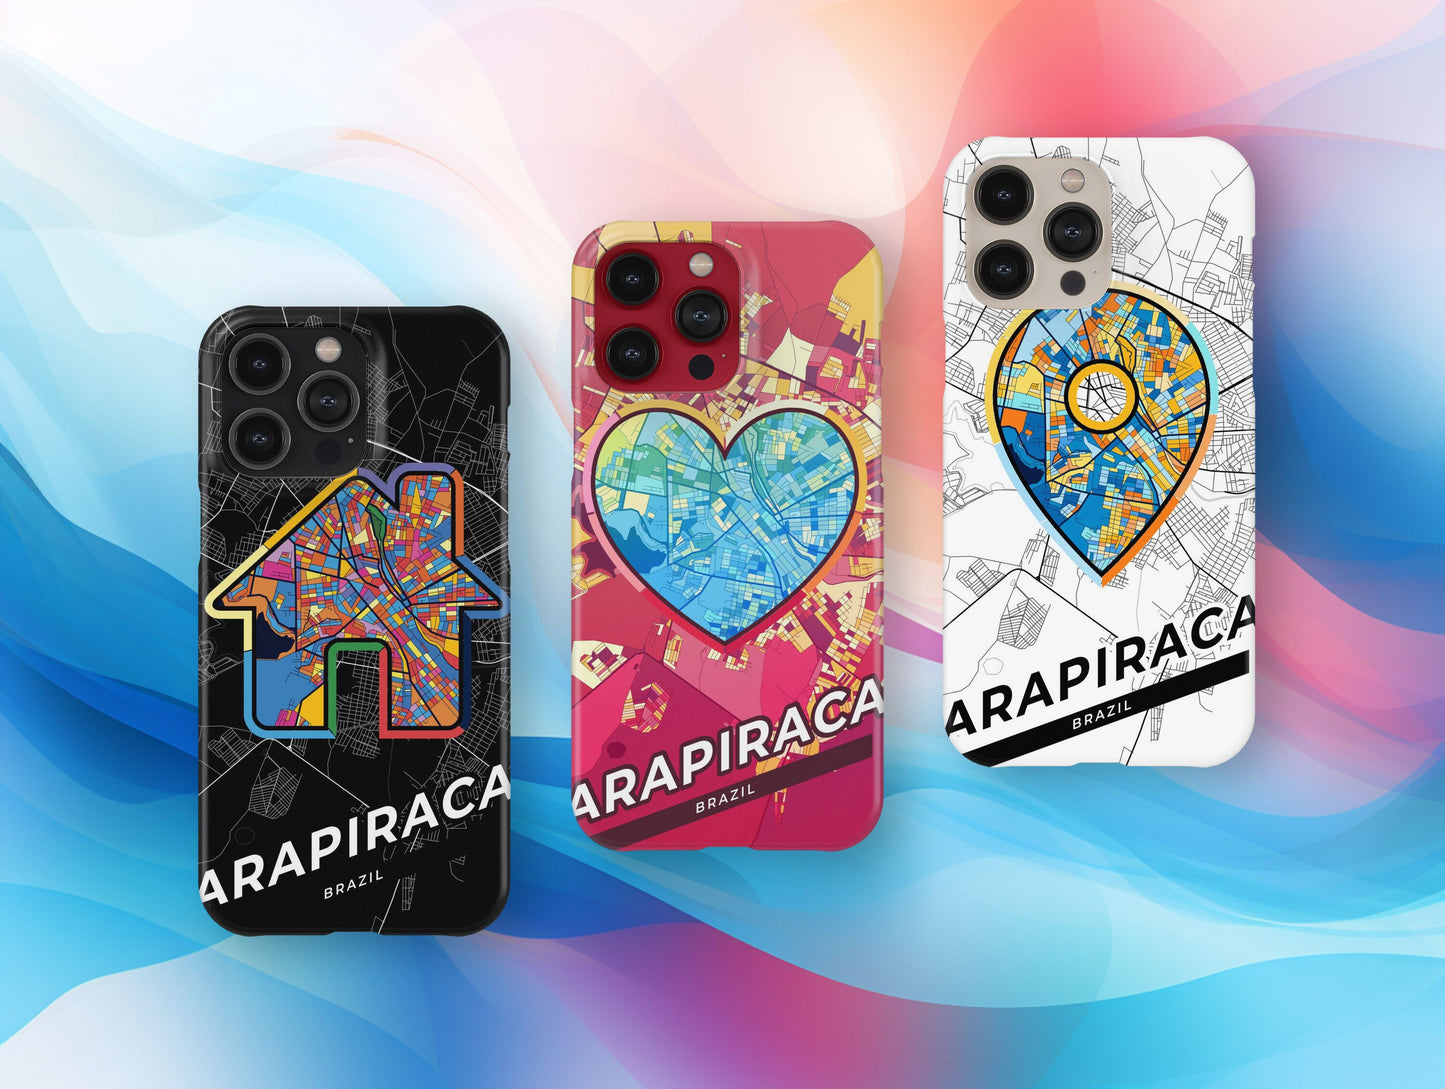 Arapiraca Brazil slim phone case with colorful icon. Birthday, wedding or housewarming gift. Couple match cases.